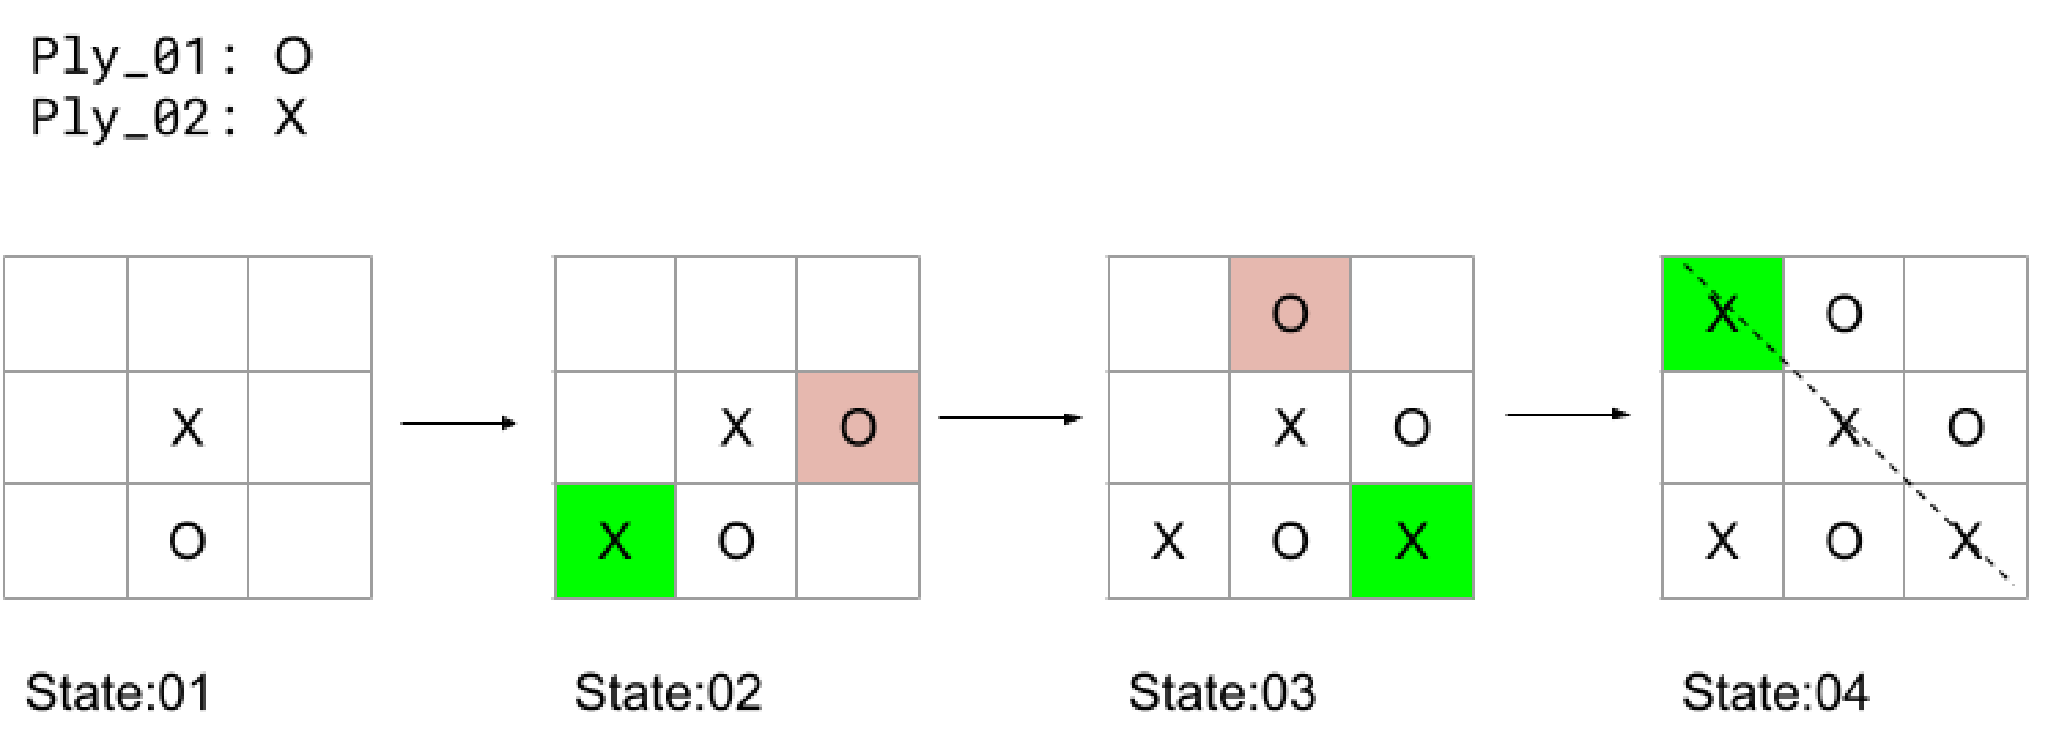 Fig 01: Possible states of a hypothetical game